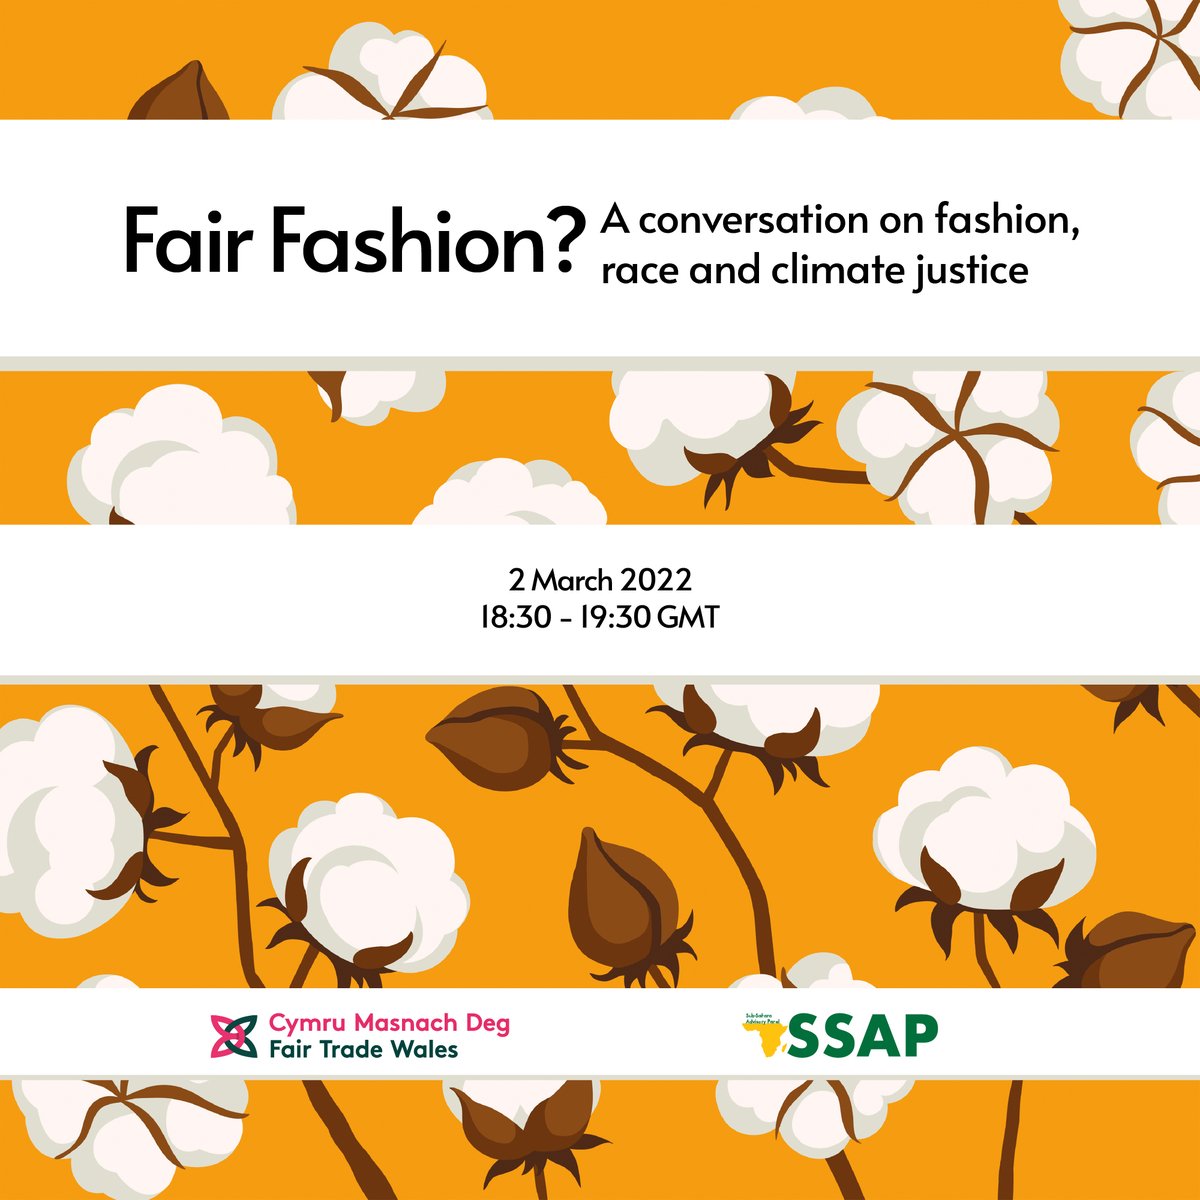 📢 EVENT: Fair Fashion? A conversation on fashion, race and climate justice Join our online convo on the global fashion industry, and its impact on people and planet. Guest speakers @opheliaax, @Simmoneahiaku, and Subindu Gharkel #FairtradeFortnight bit.ly/3rk8YMm